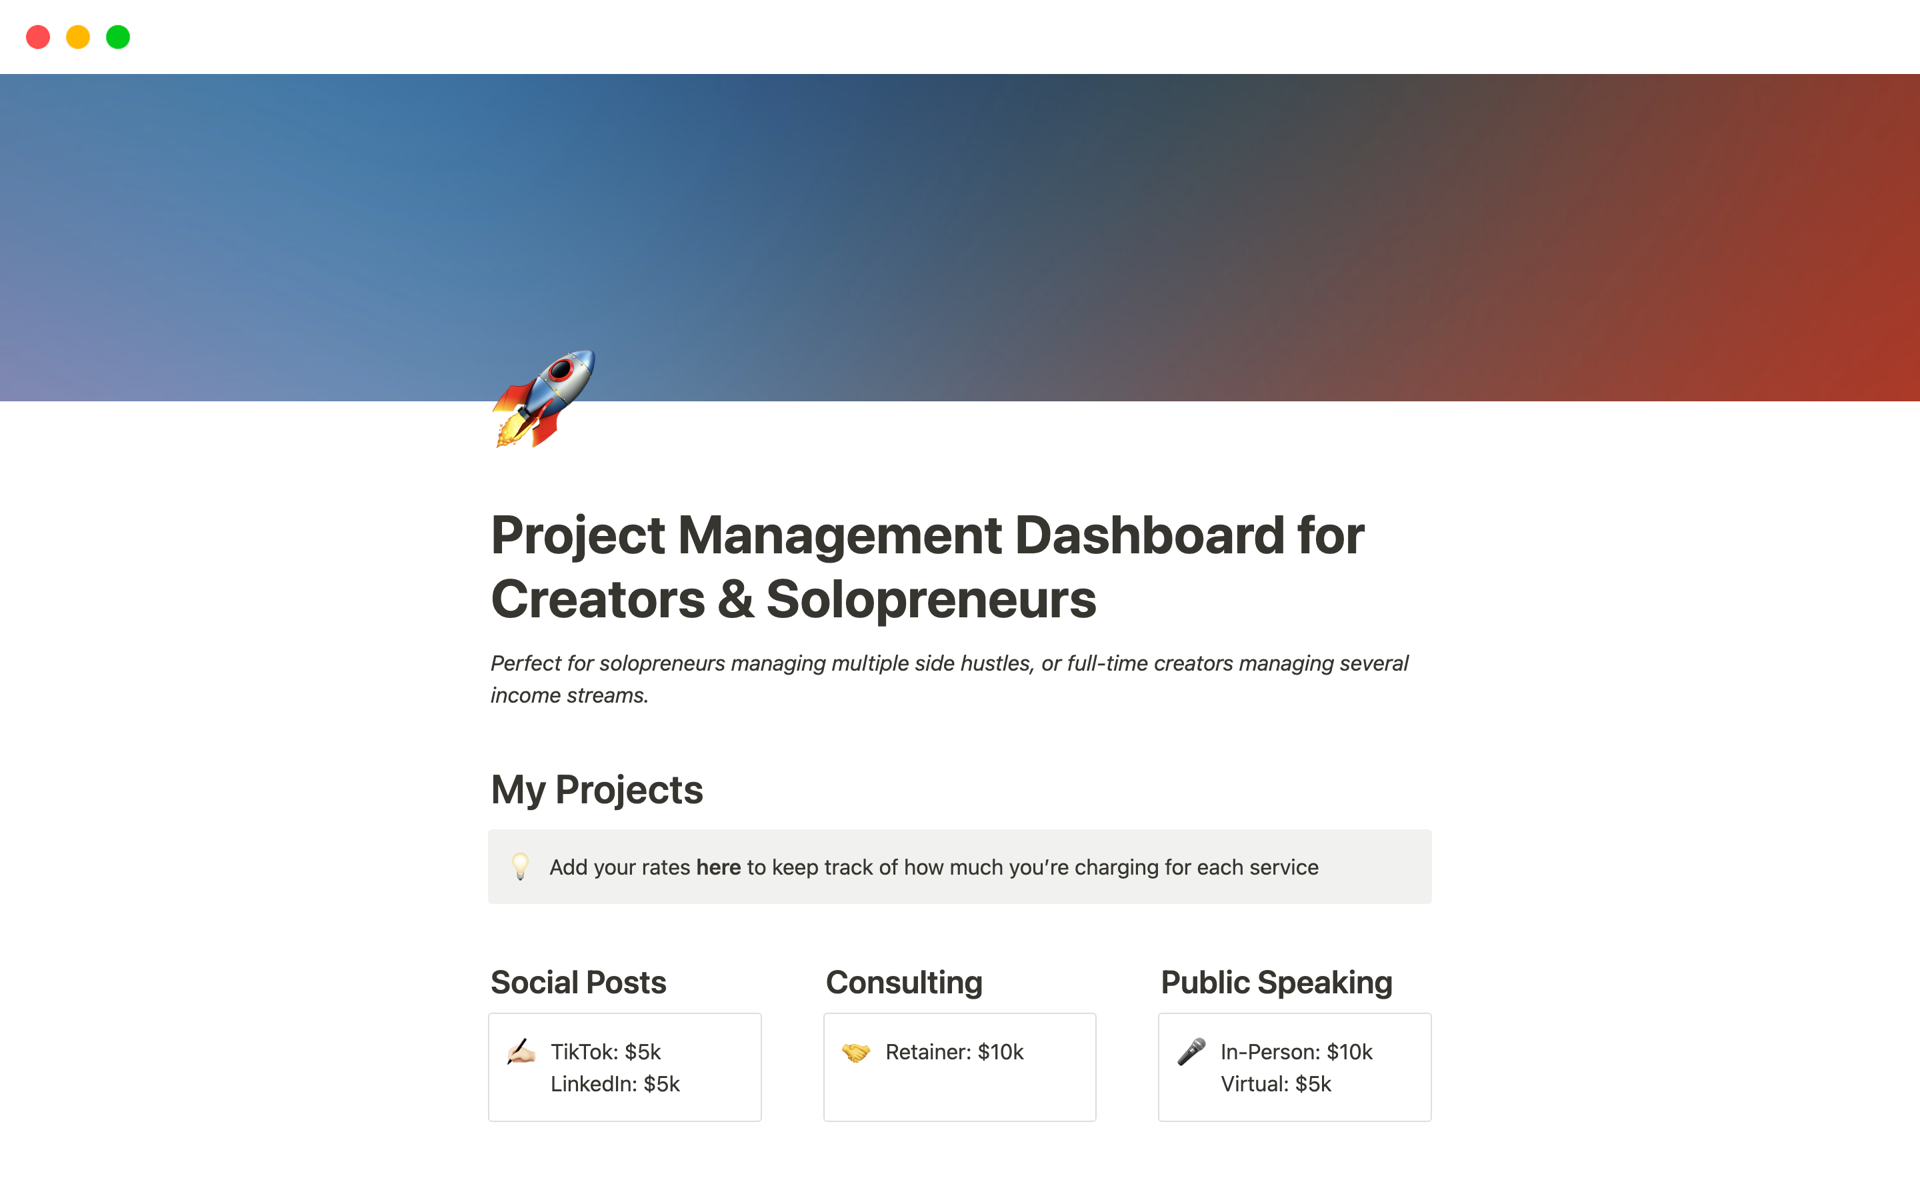 This template is perfect for creators who are full-time and managing several types of projects/income (consulting, public speaking, sponsored social posts, etc.). Same with solopreneurs with several side hustles they're trying to keep track of.